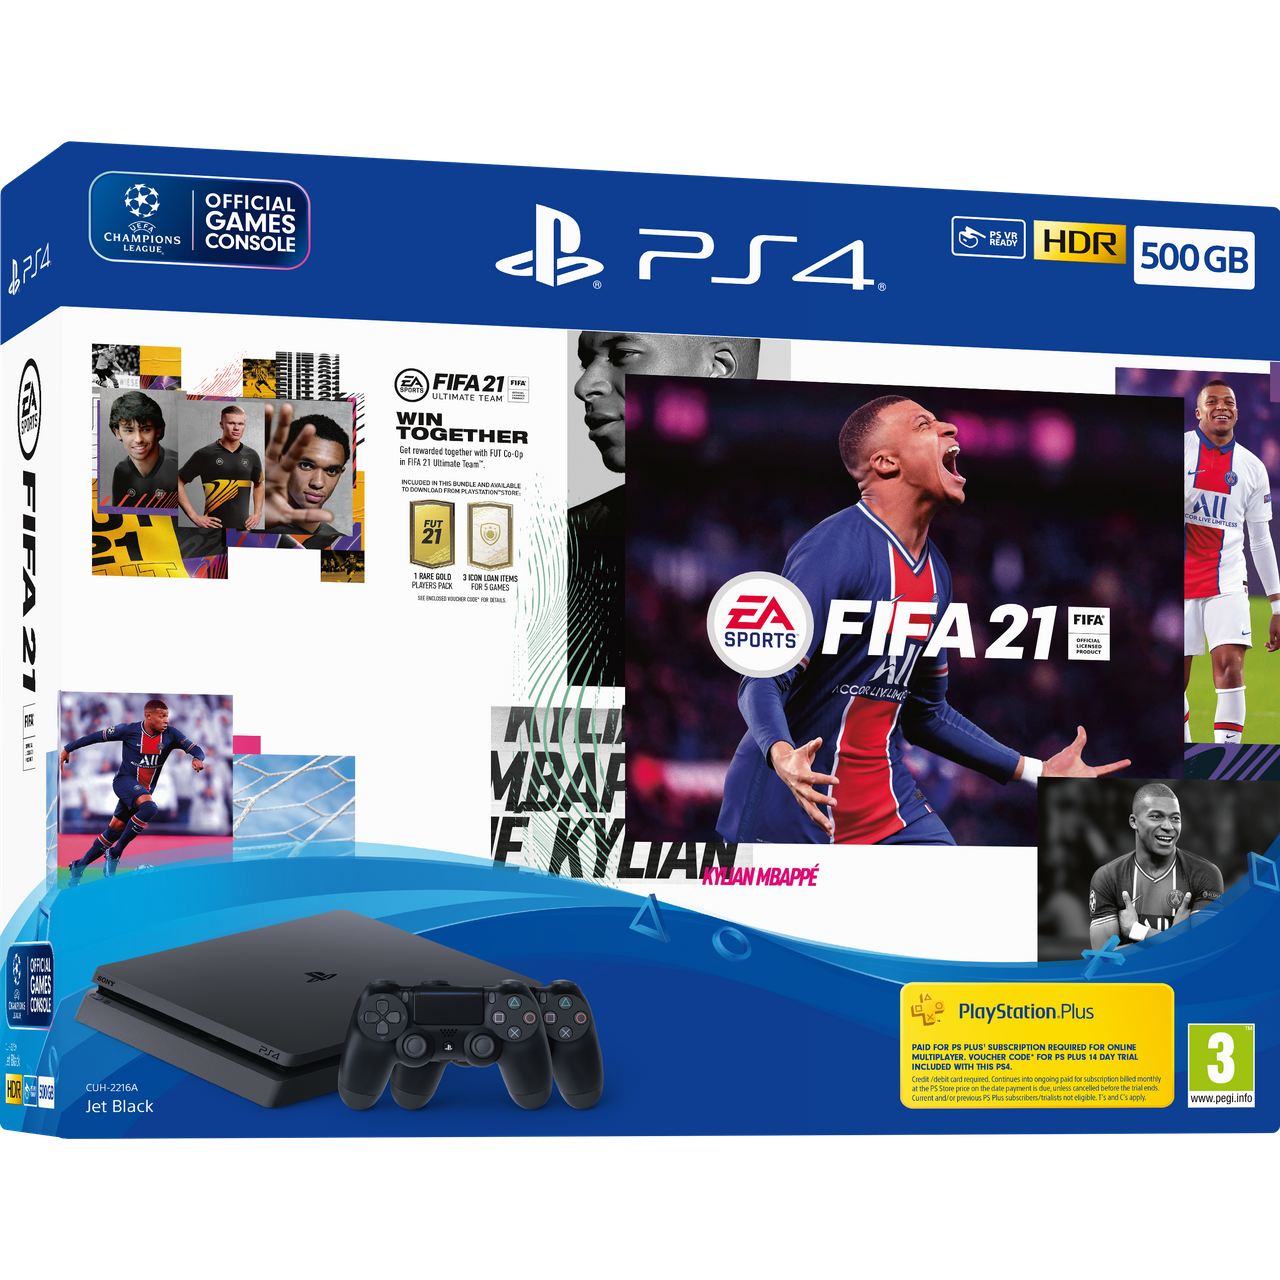 PlayStation 4 500GB with Fifa 21 (Disc) and DualShock 4 Wireless Controller Review